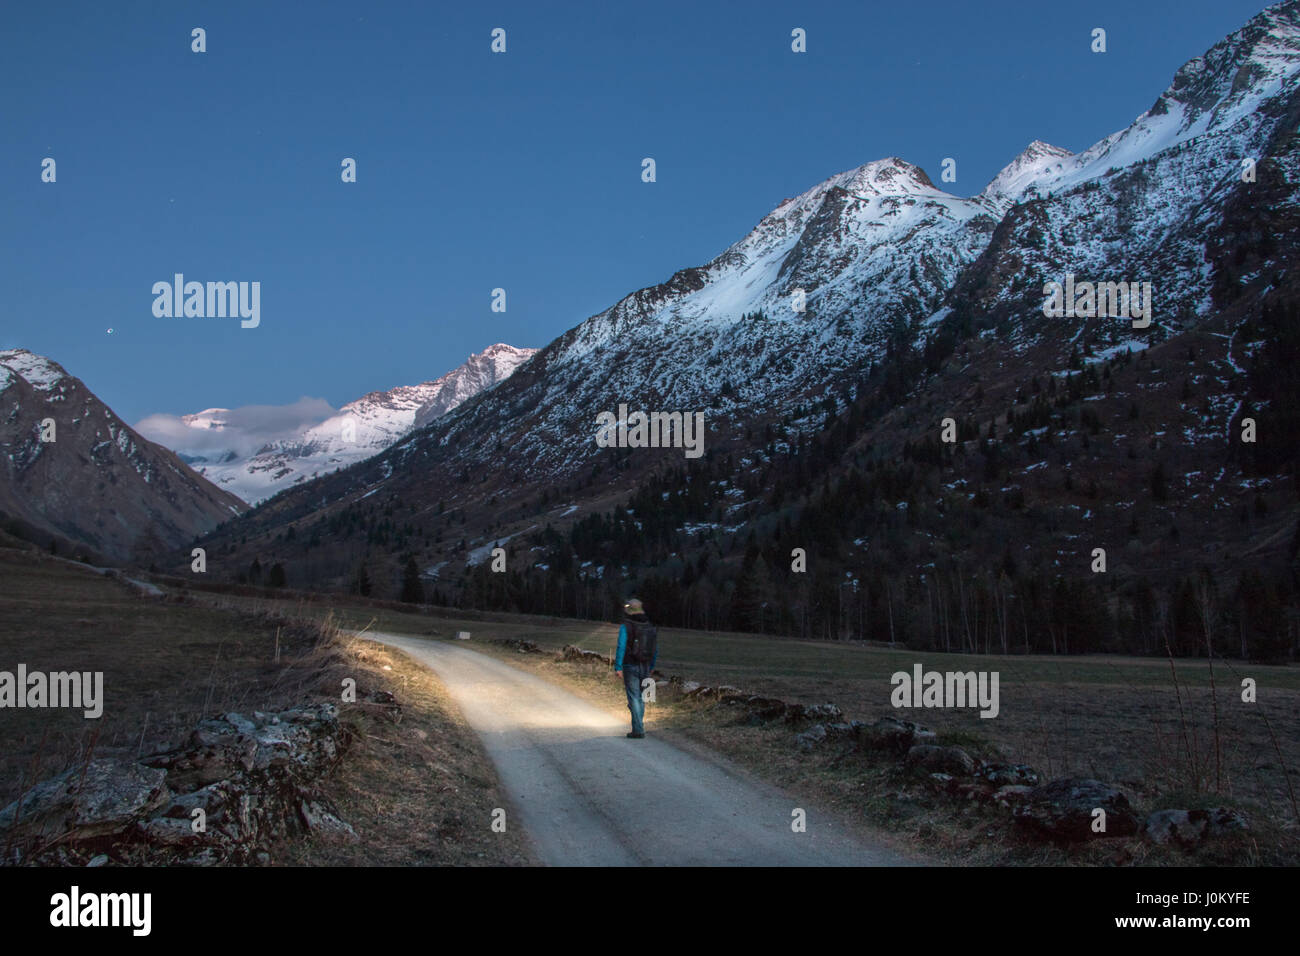 A man adventuring in the mountains at night exploring and looking at the stunning scenery wearing a headlight torch to see as walking at dawn Stock Photo